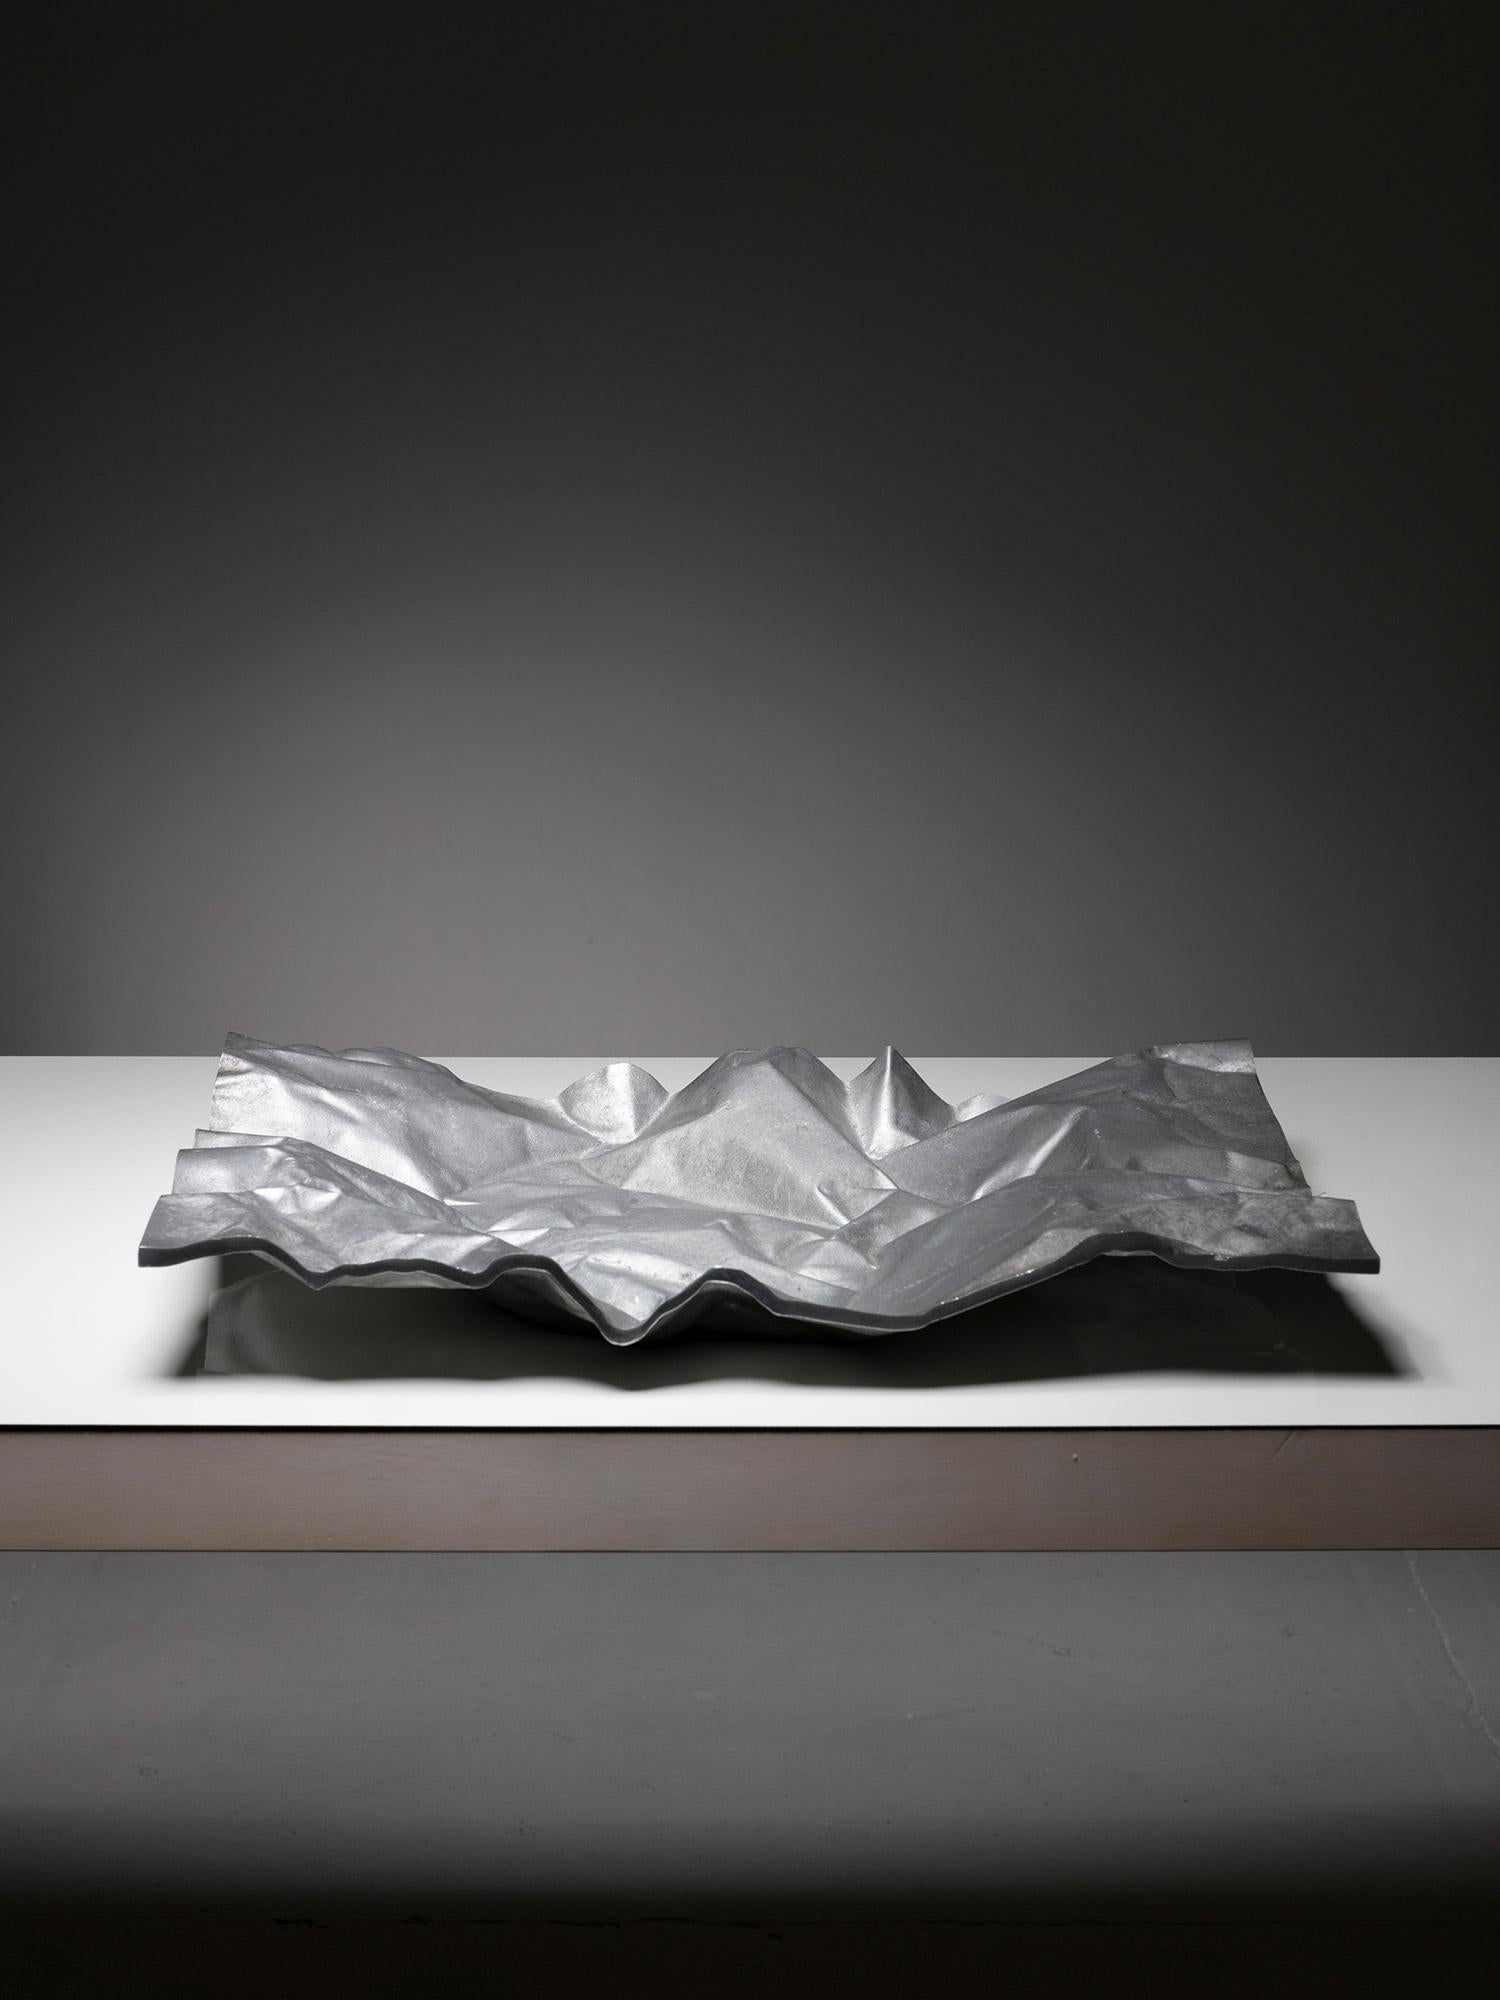 Rare aluminum centerpiece by Nerone Ceccarelli and Giancarlo Patuzzi, Gruppo NP2.
Thick aluminum crumpled sheet piece, it shows connections with the succeeding 